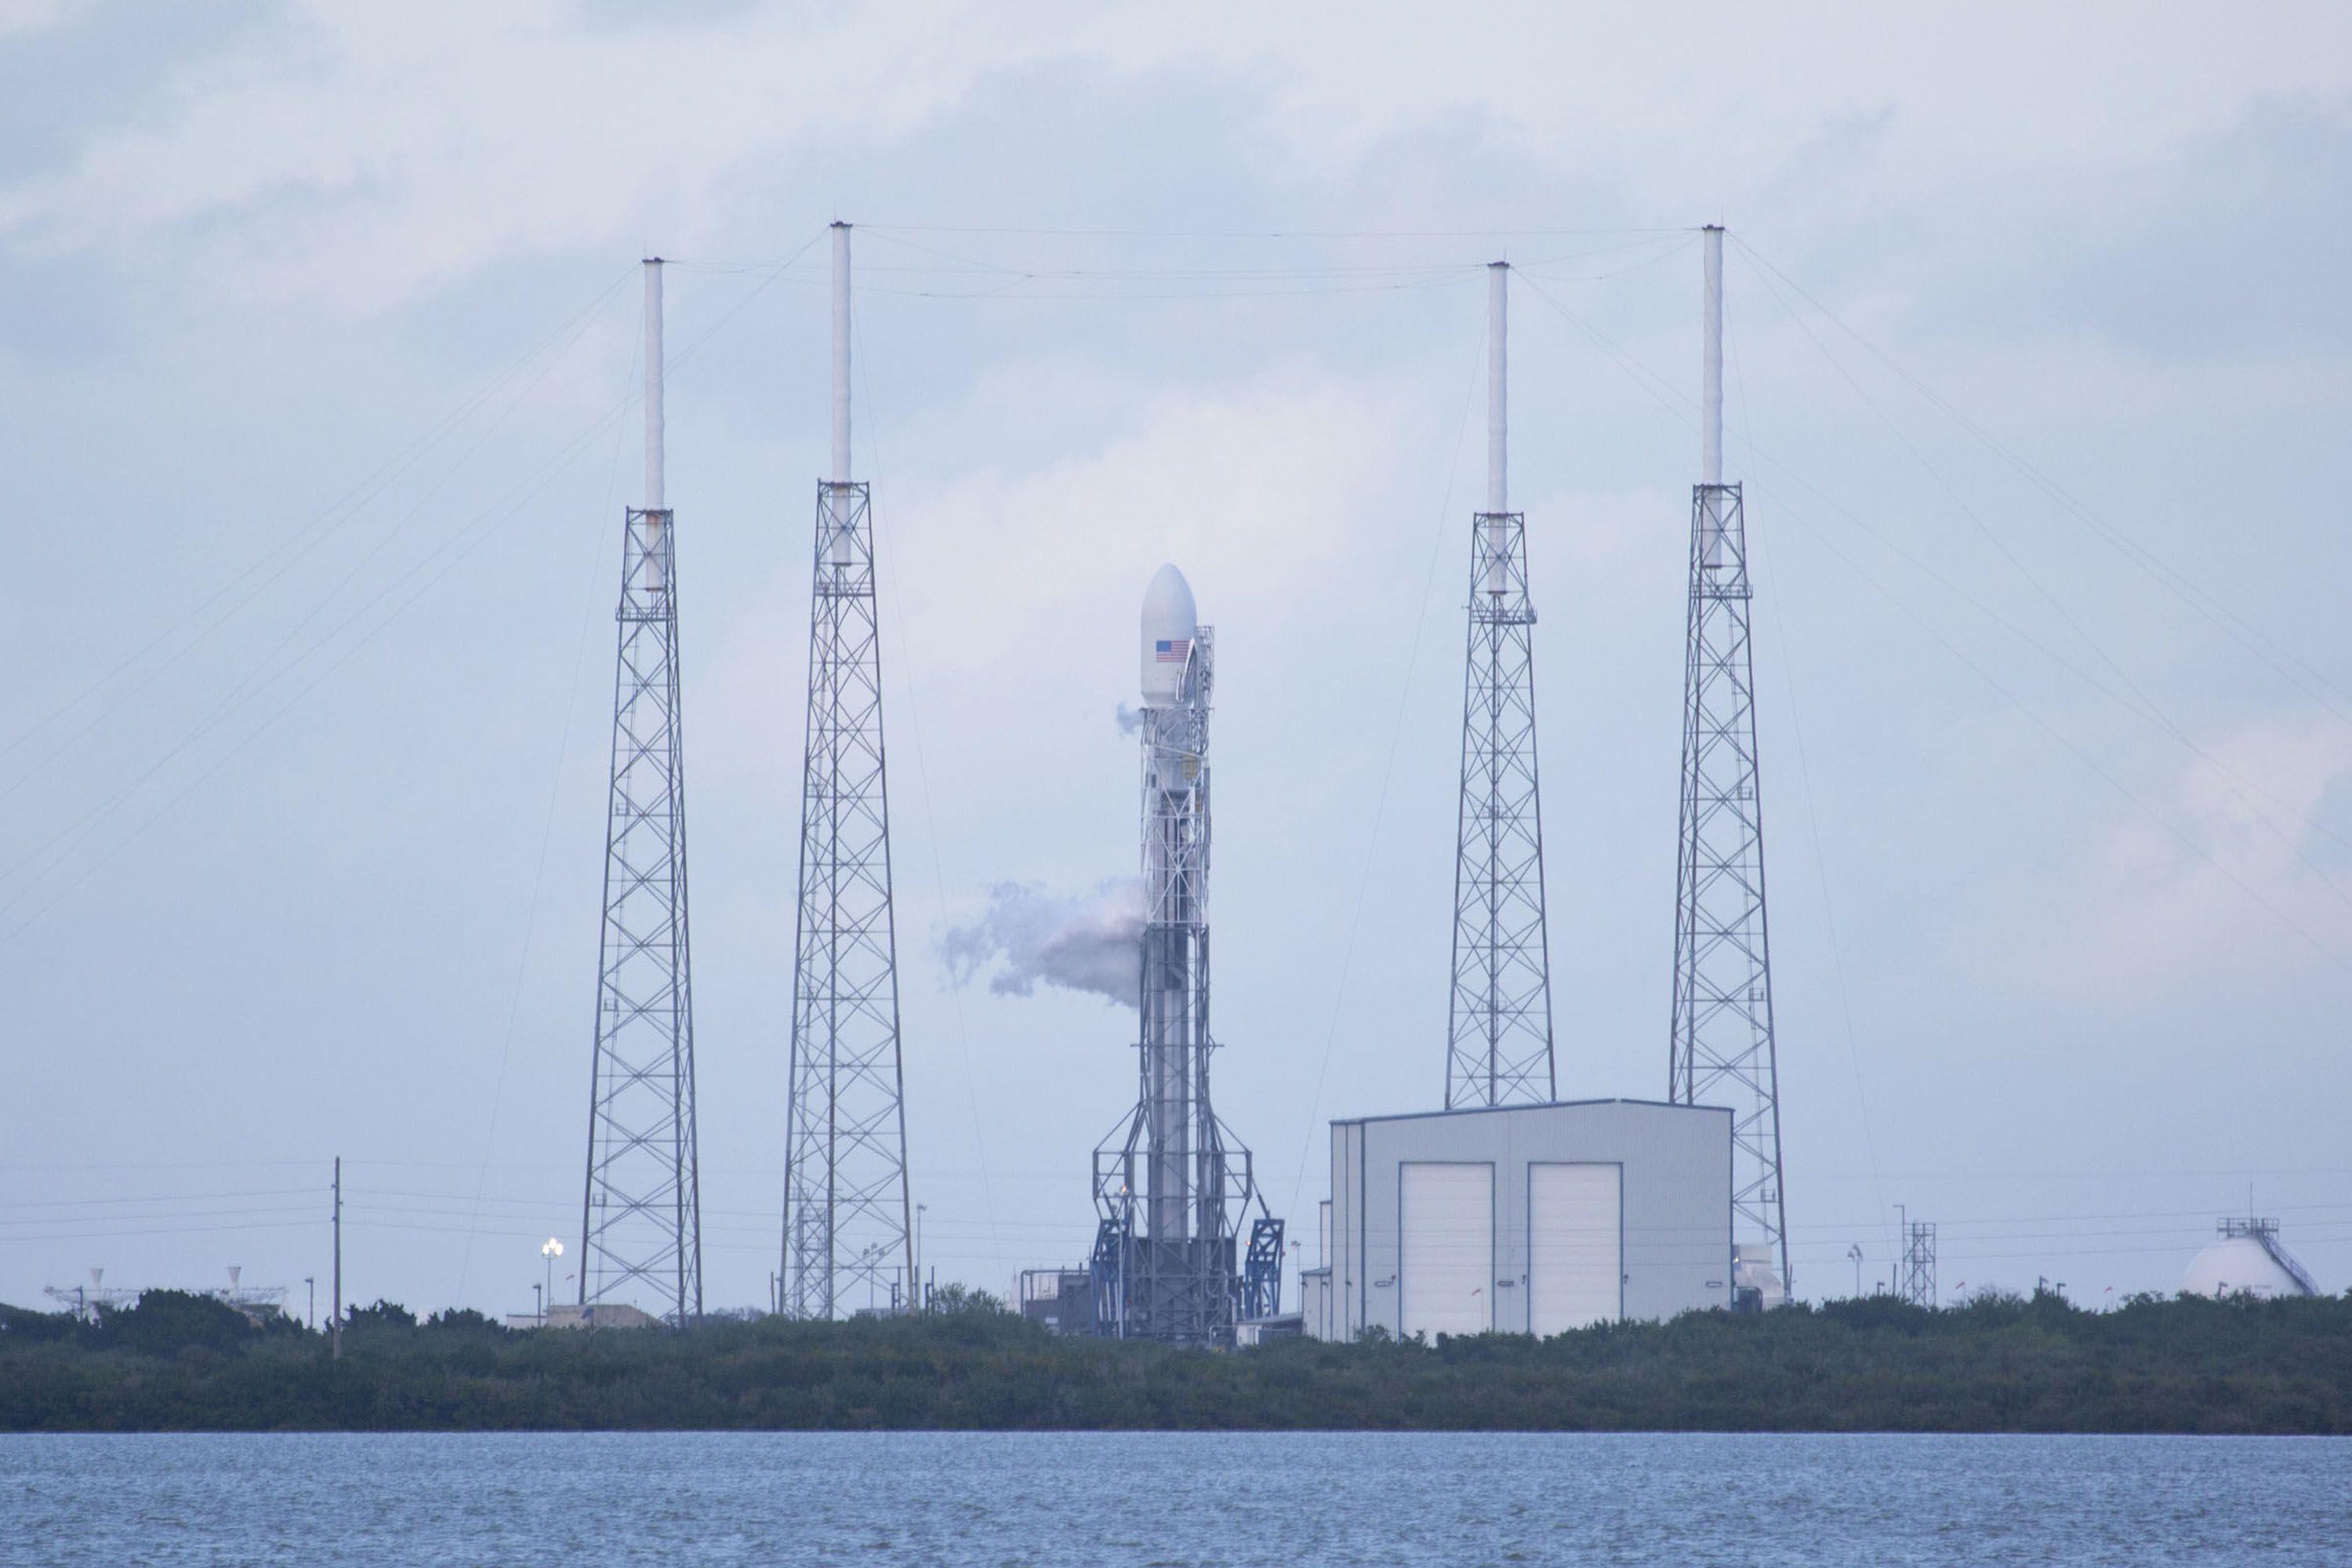 Verical SpaceX Falcon Heavy Logo - SpaceX's Falcon Heavy is Vertical on the Launchpad for the First Time